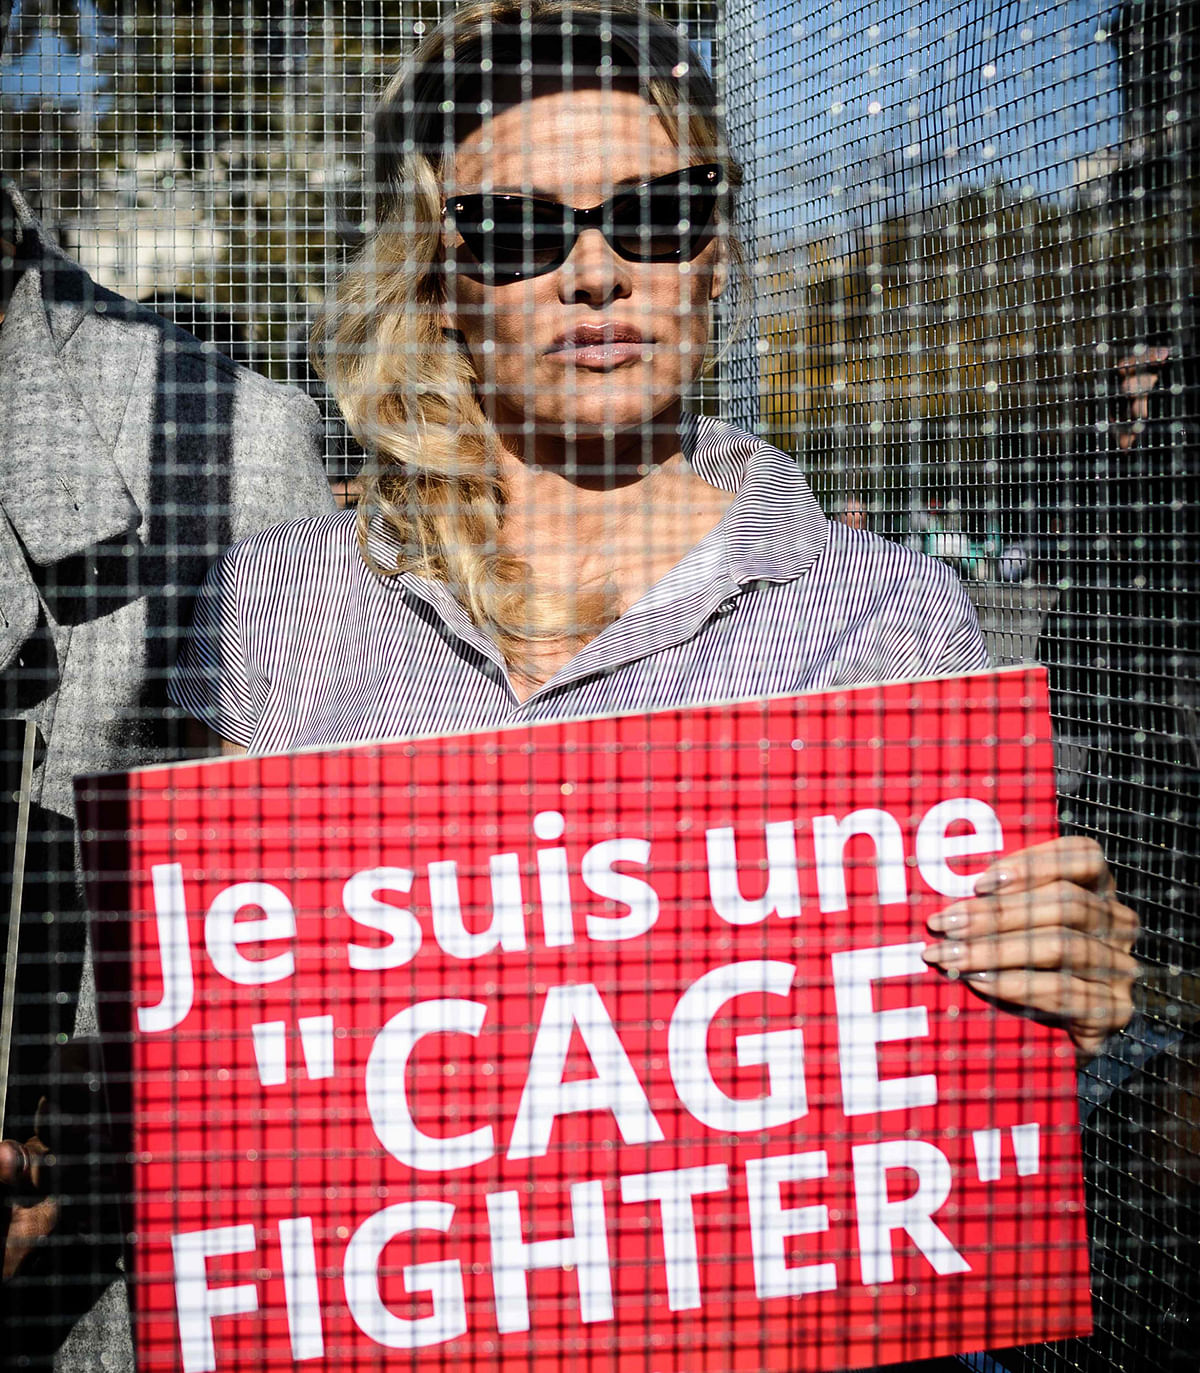 US-Canadian actress Pamela Anderson (R) and her dancing partner Maxime Dereymez stand in a cage displaying placards against the caging of animals during an event organized by the NGO Compassion in World Farming (CIWF) in Paris on 10 October 2018. Photo: AFP